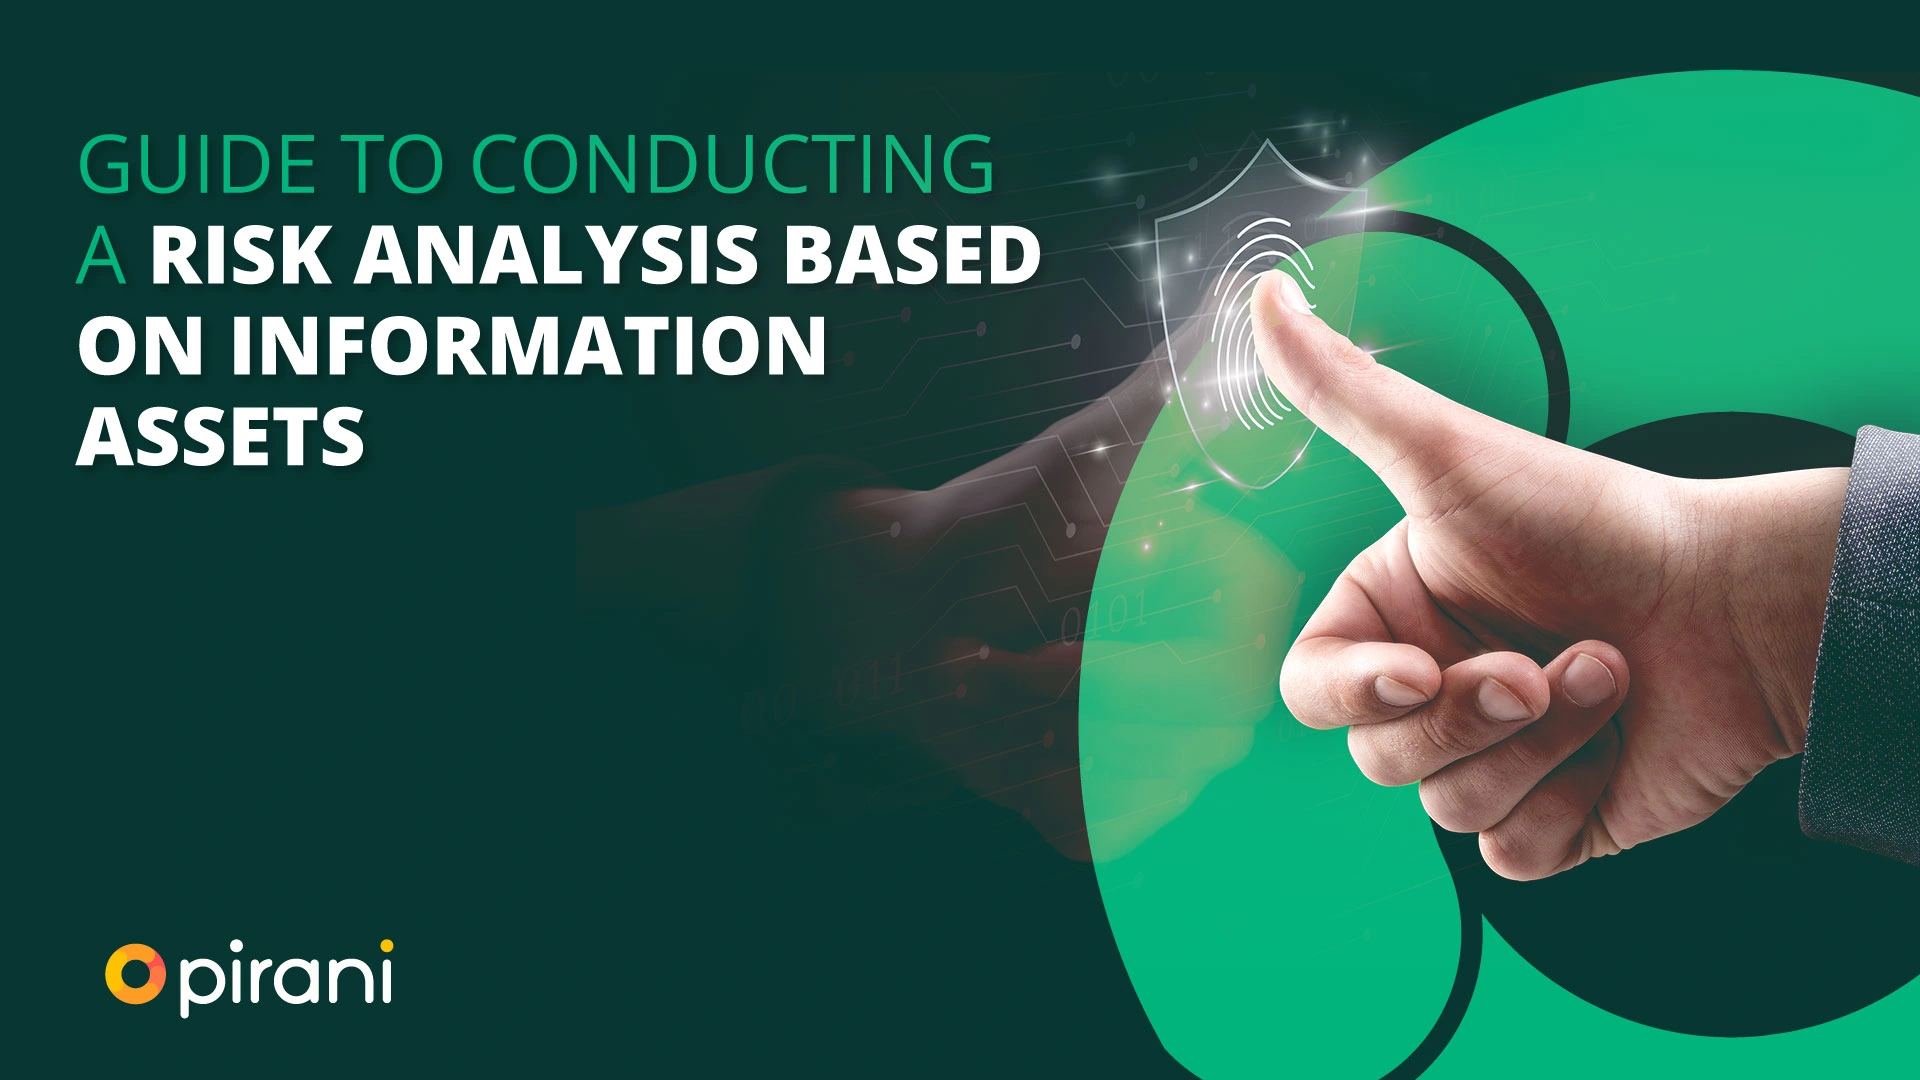 Guide-to-conducting-a-risk-analysis-based-on-information-assets-Portada